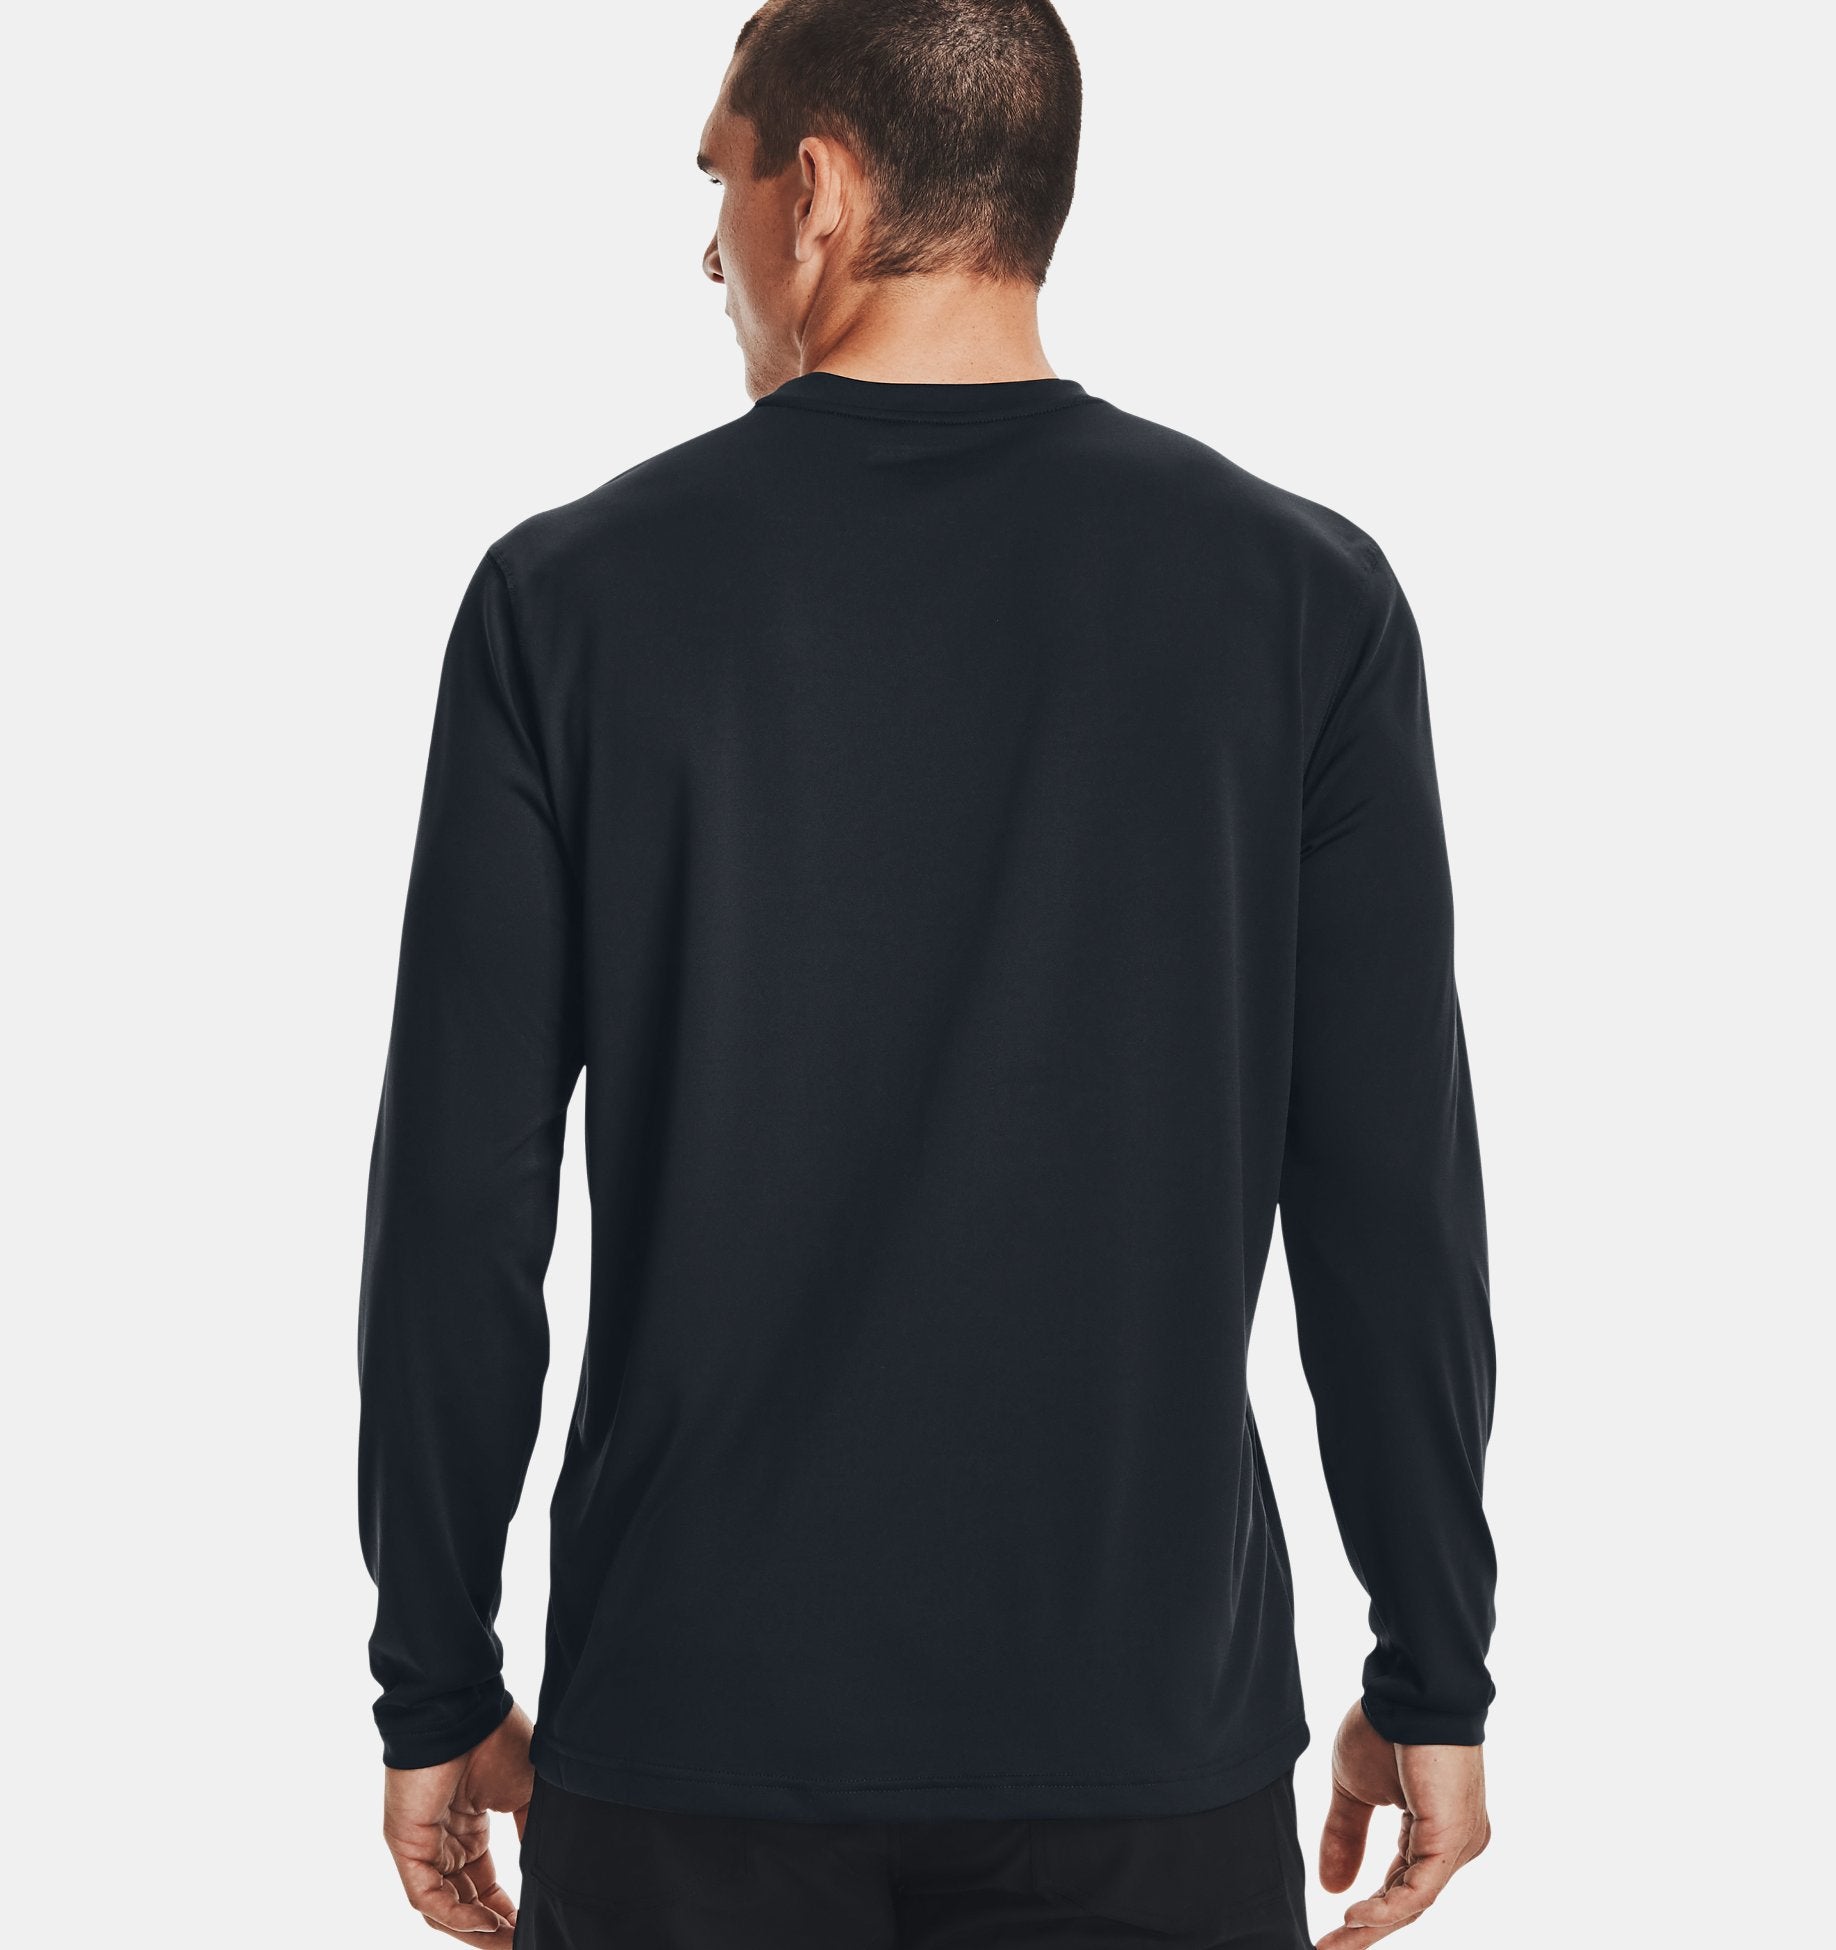 Under Armour Tactical UA Tech Long Sleeve T-Shirt 1248196 - Clothing & Accessories